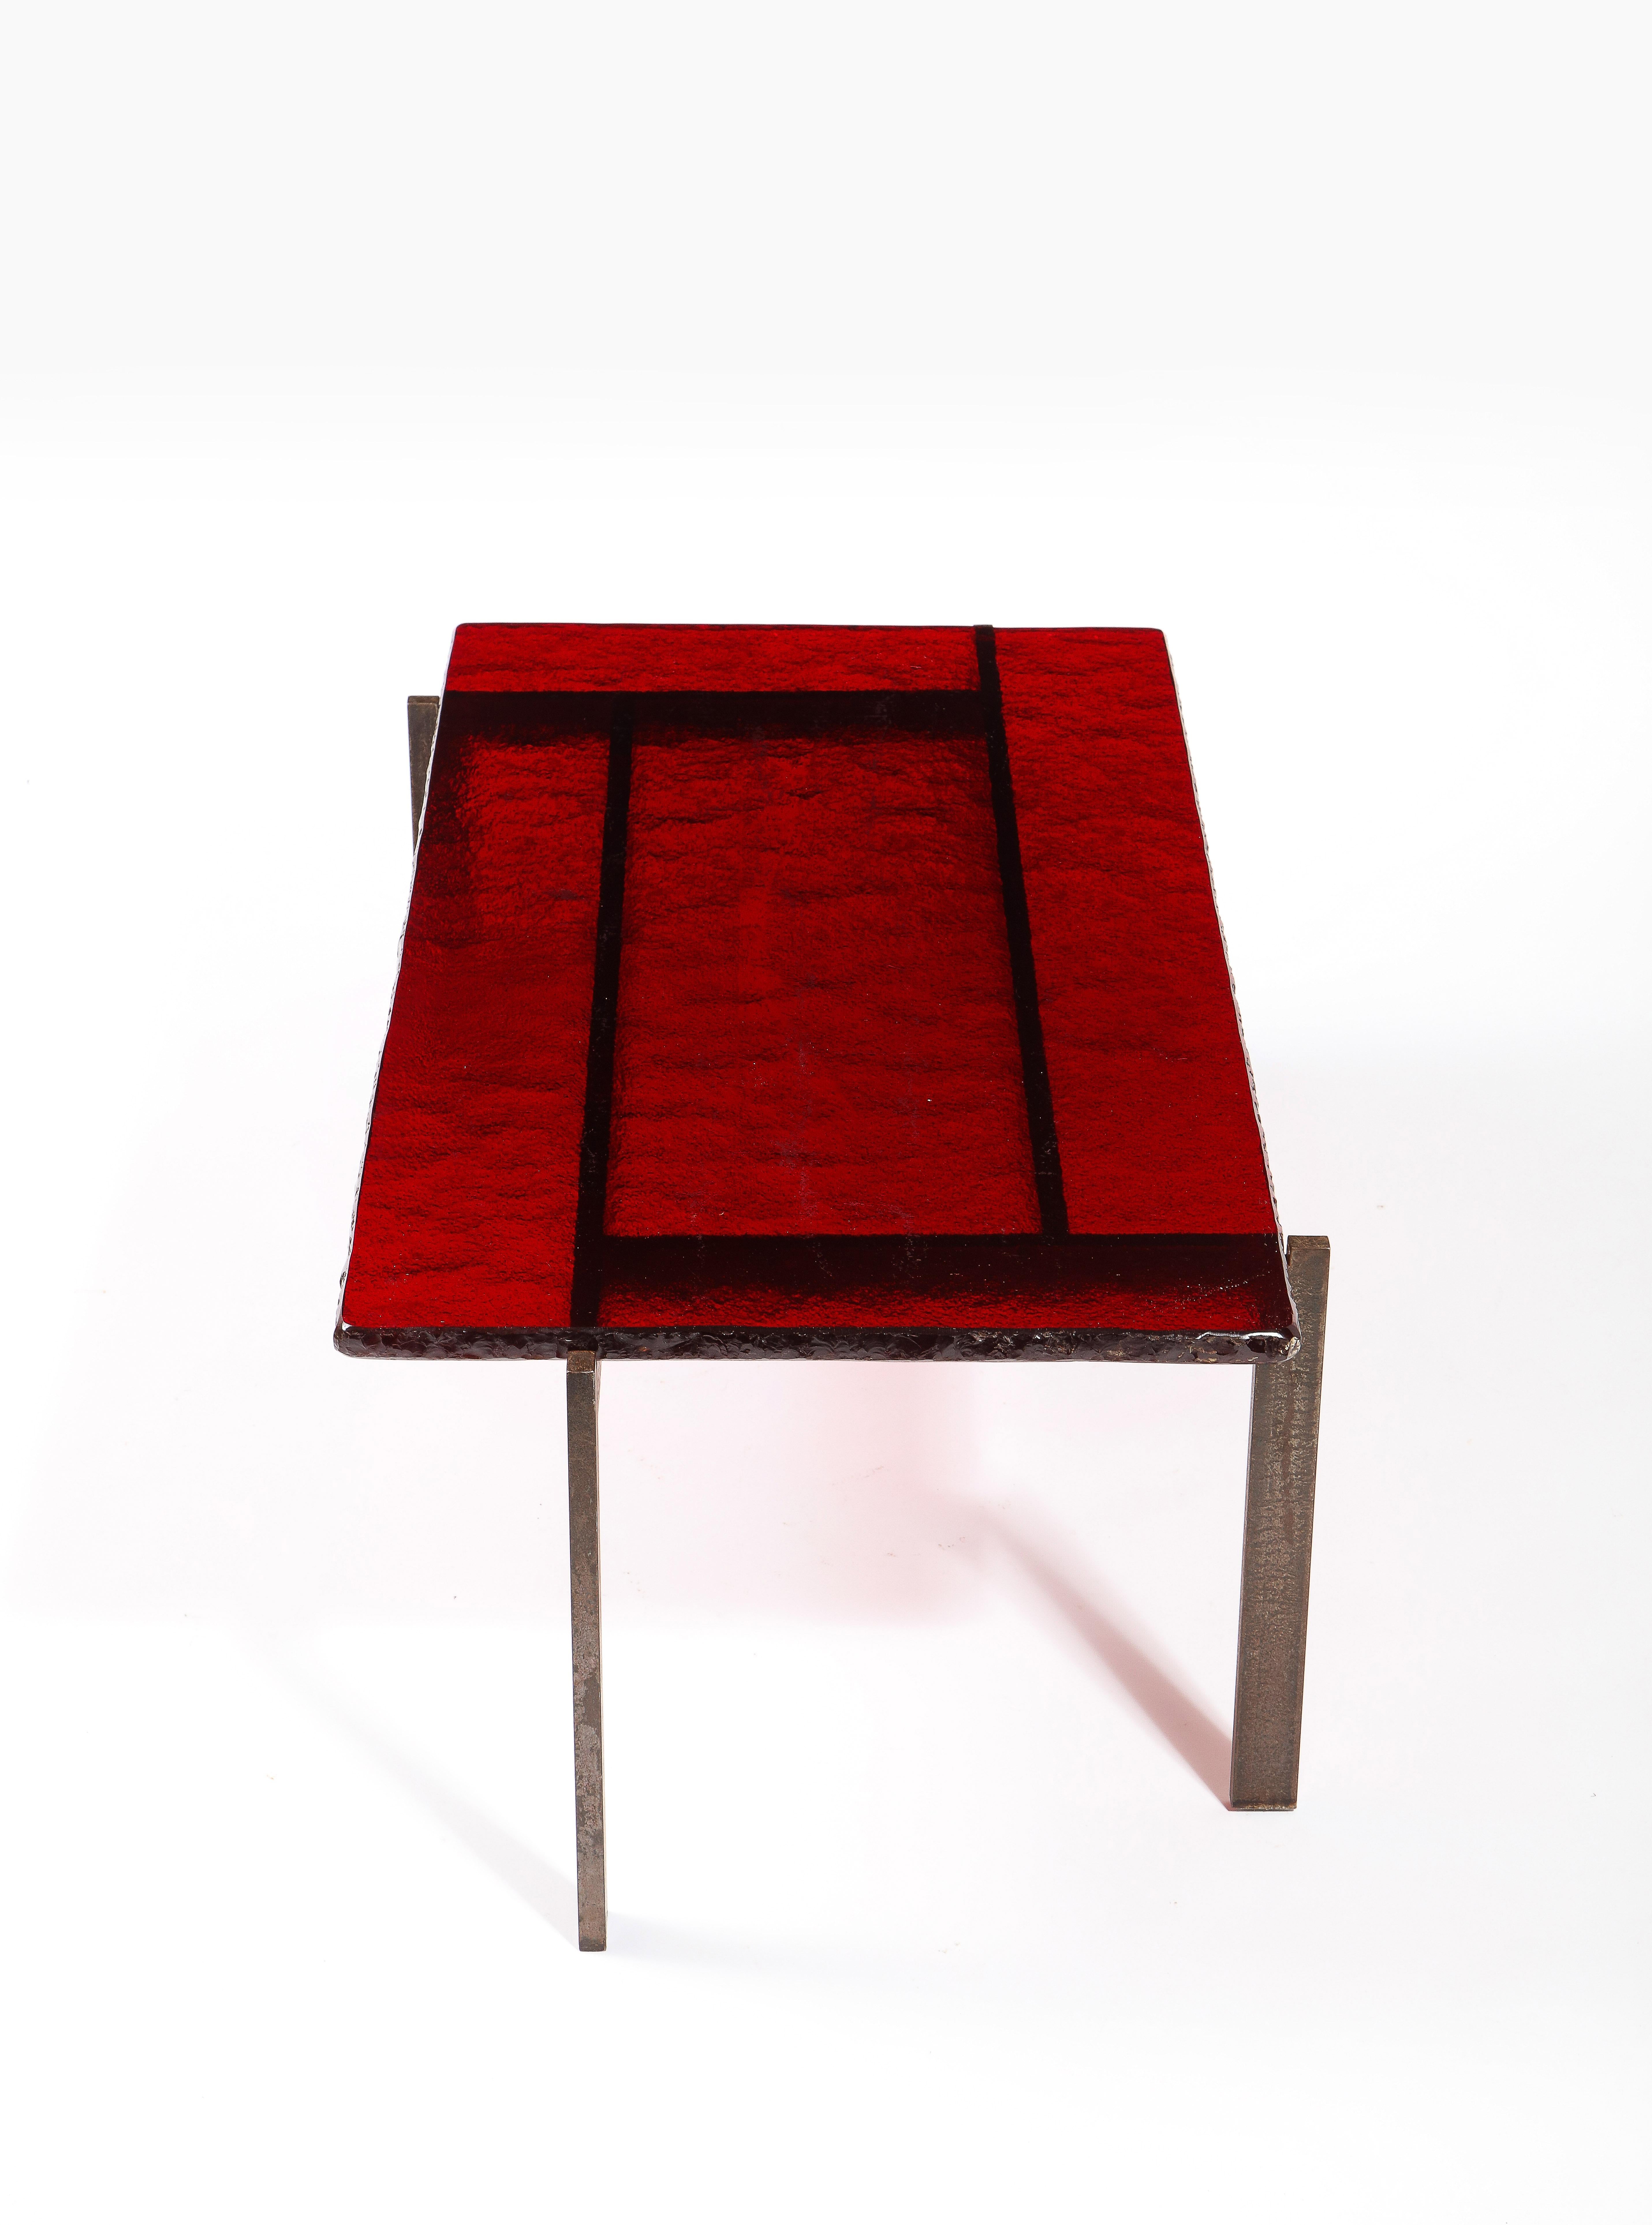 Ruby Red Saint Gobain Glass & Steel Modernist Coffee Table, France 1960's For Sale 5